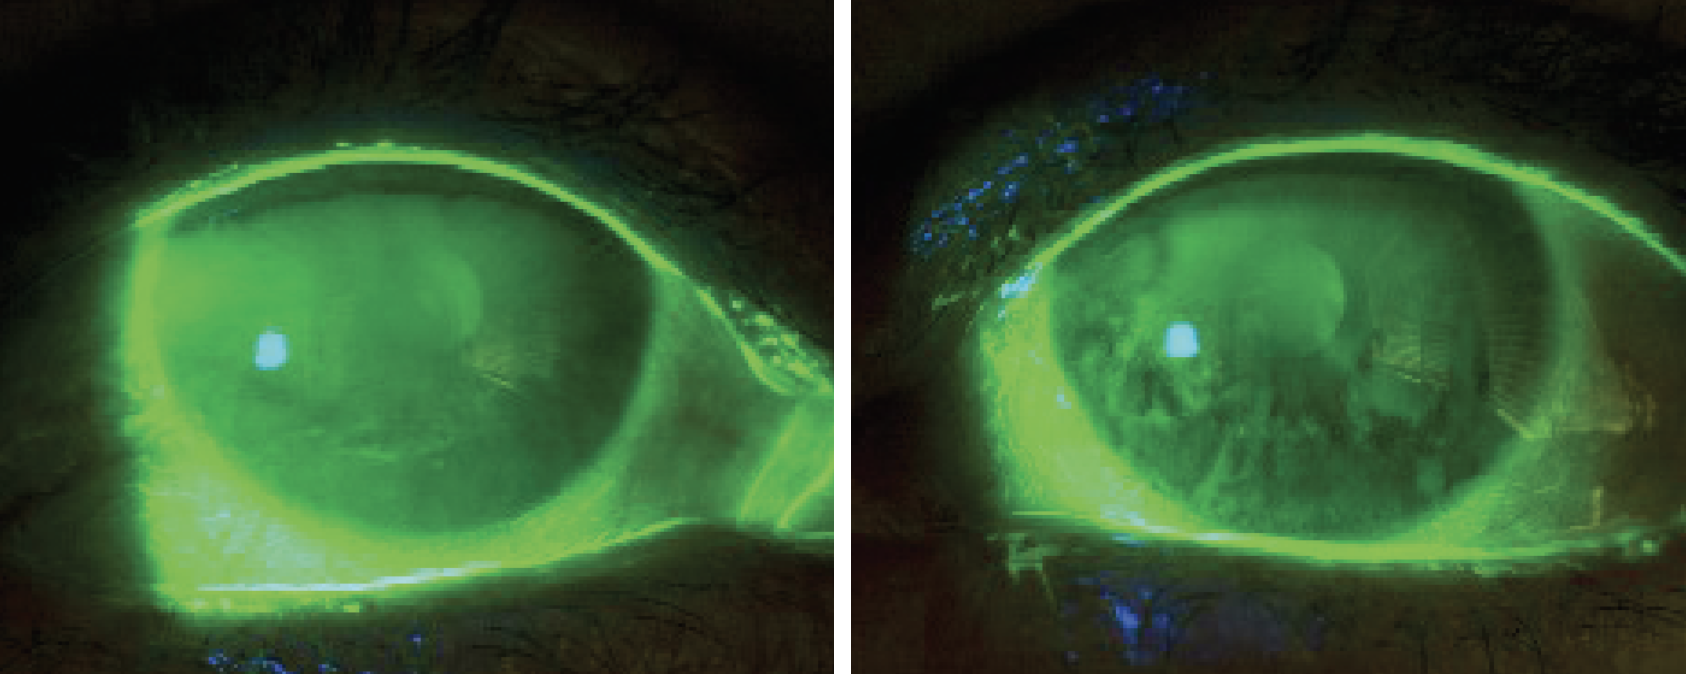 Fig. 2. At left, OD improvement of epithelial defect after amniotic membrane. At right, OS improvement of confluent SPK after amniotic membrane.